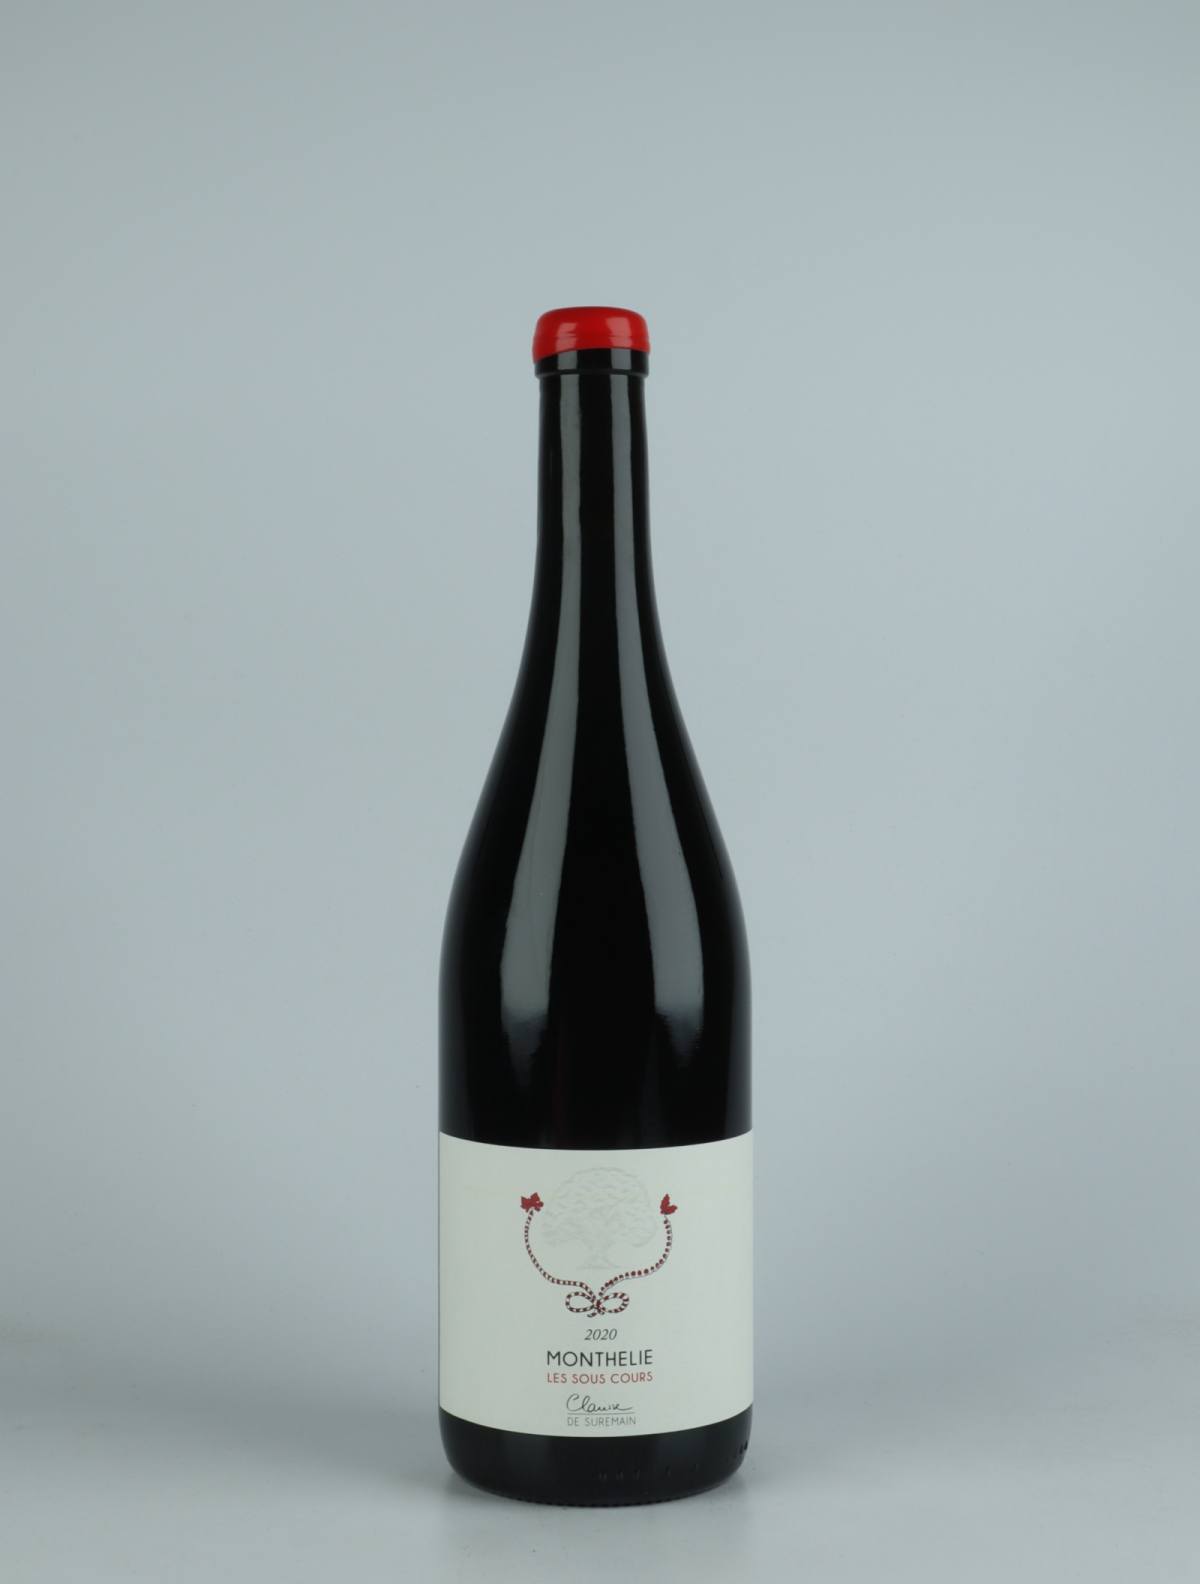 A bottle 2020 Monthelie - Les Sous Cours Red wine from Clarisse de Suremain, Burgundy in France